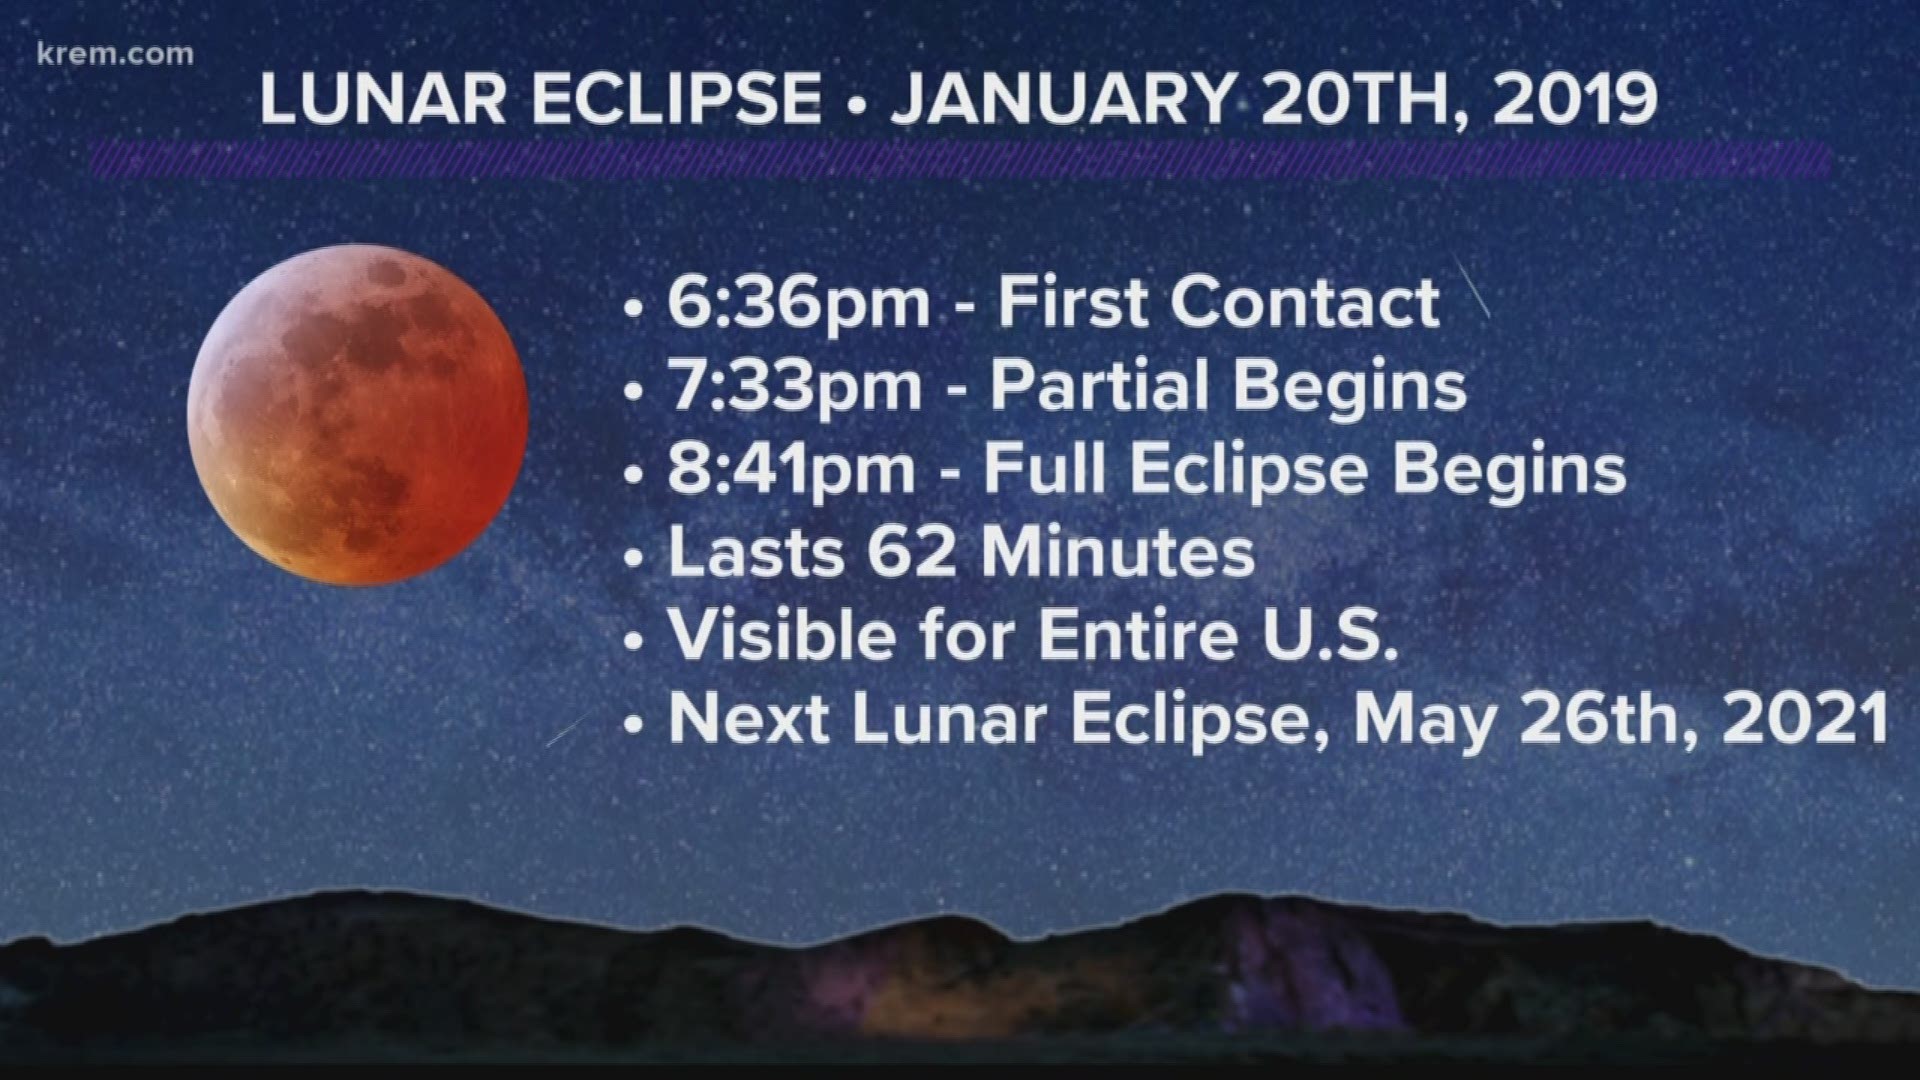 KREM 2 meteorologist Thomas Patrick explains the science behind Sunday's lunar eclipse and when the eclipse can be seen